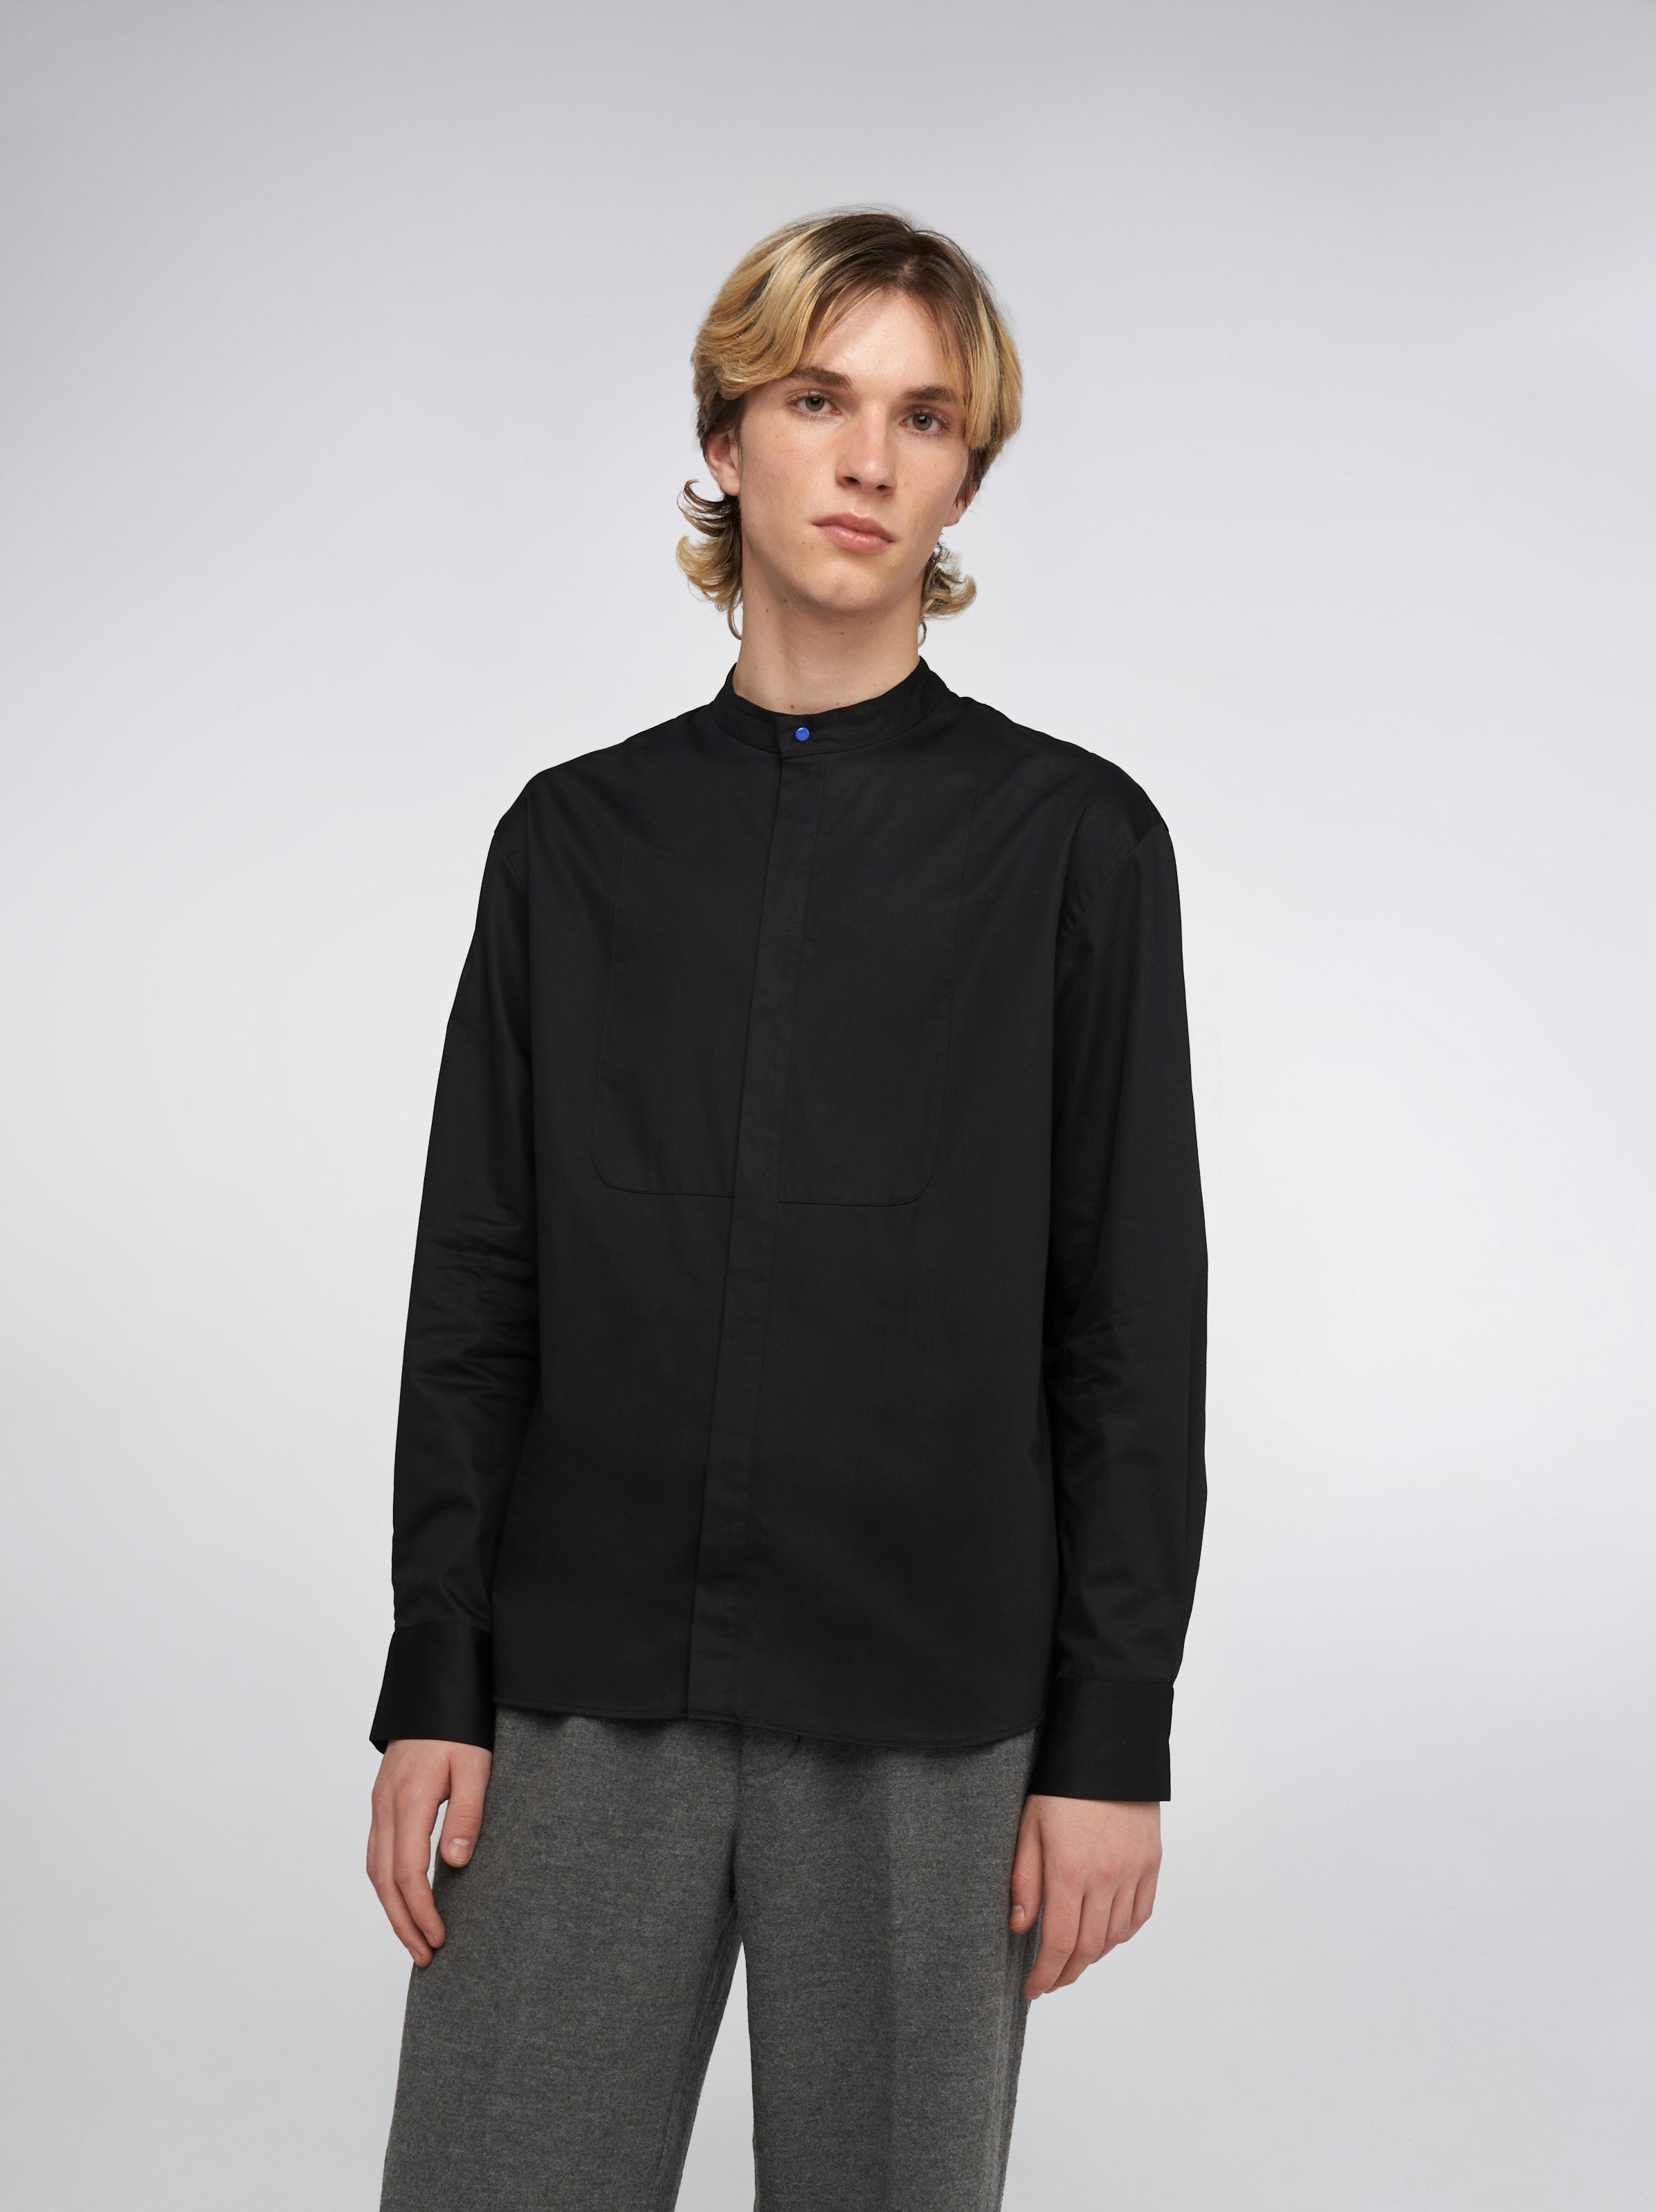 Relaxed Fit Unisex Shirt 05.2